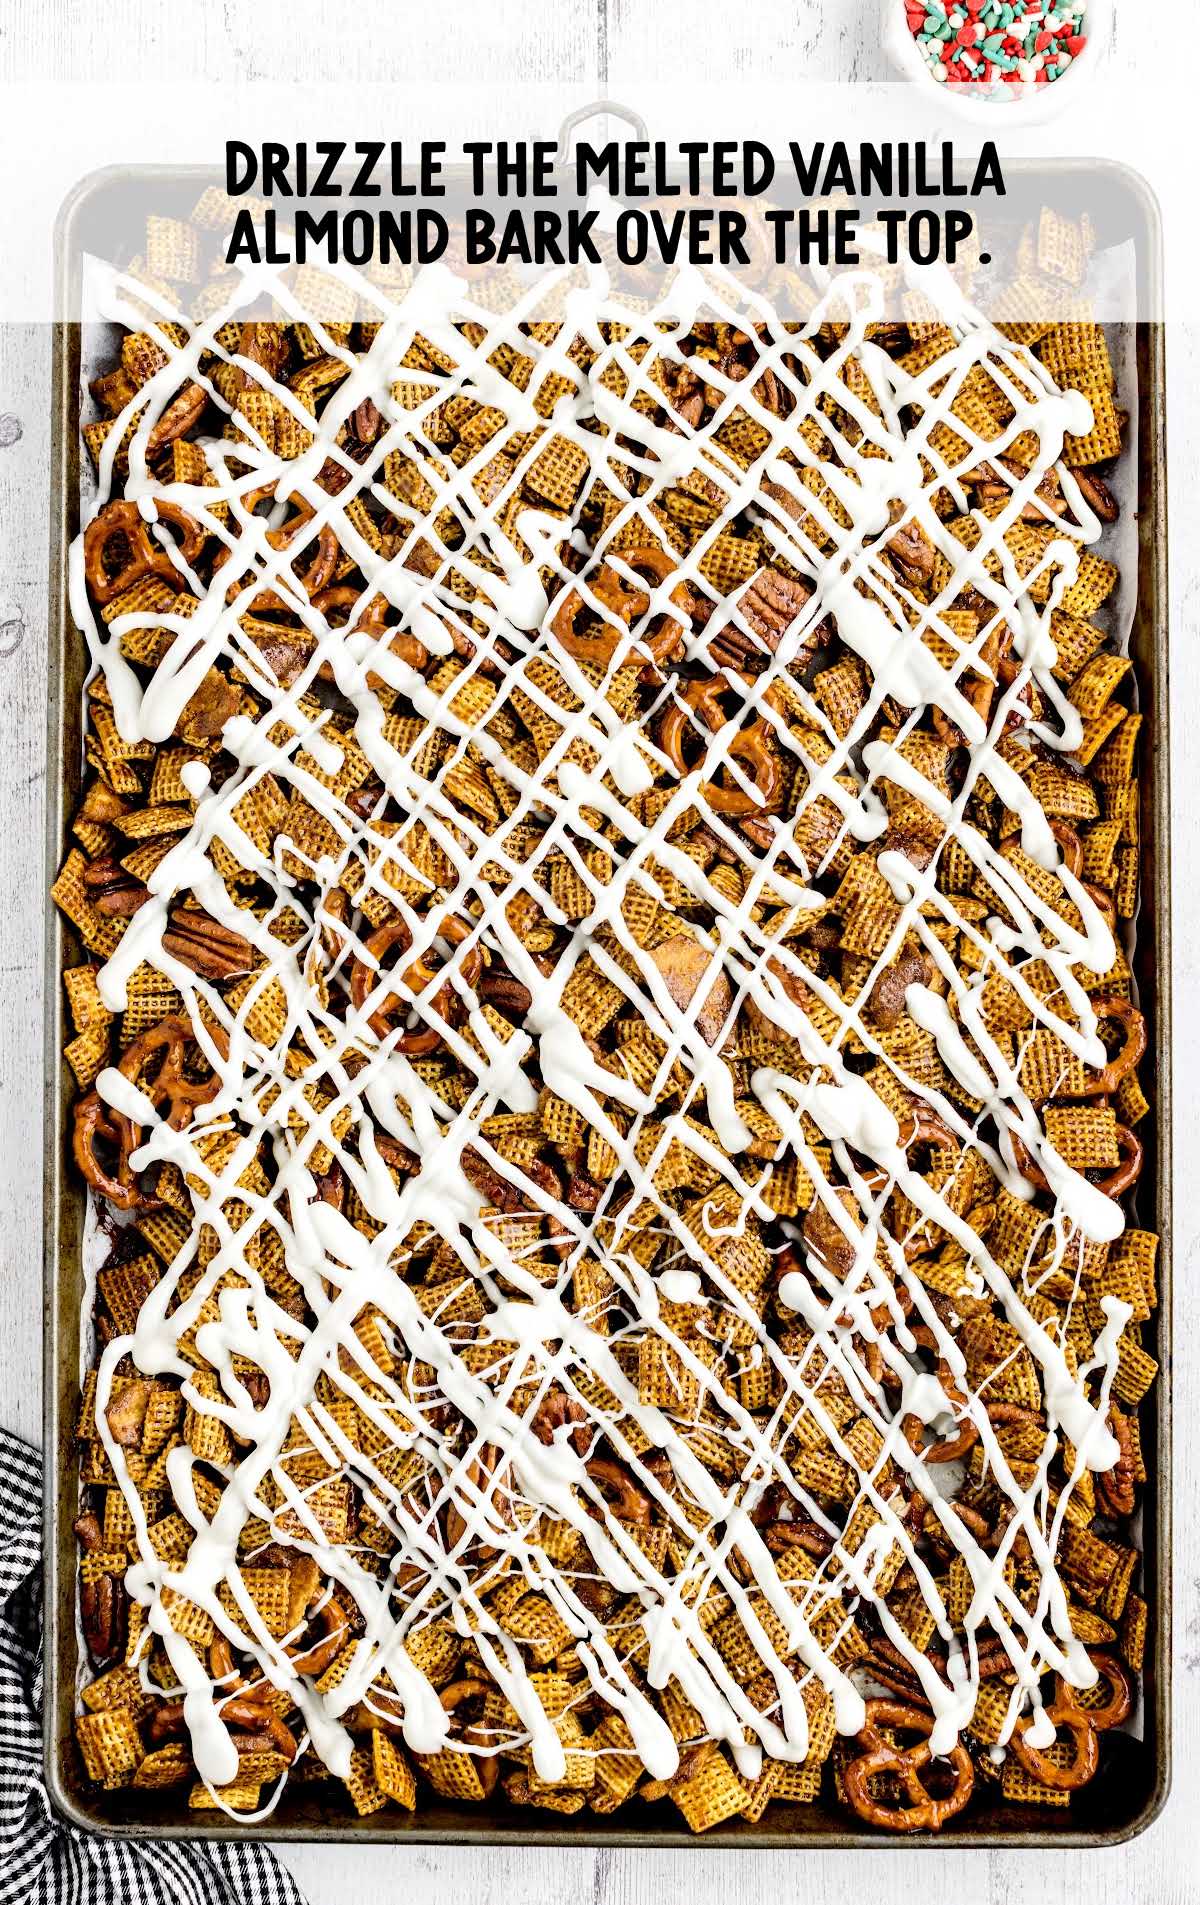 melted vanilla almond drizzled over the top of the chex mix on a baking sheet